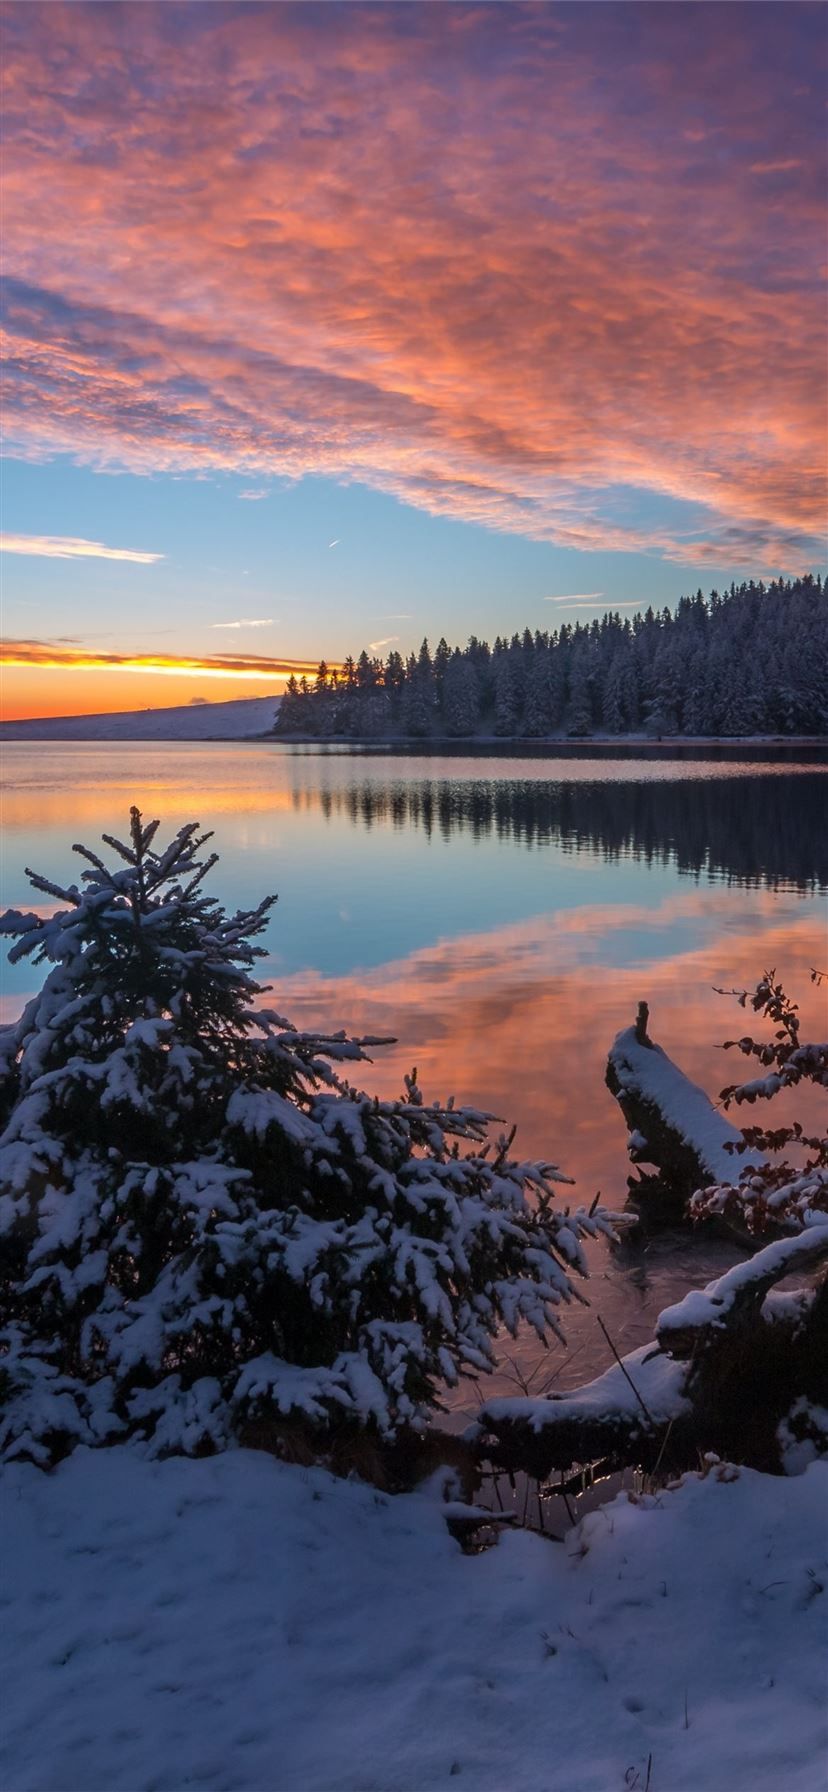 Free download the lake snow evening sunset 5k wallpaper , beaty your iphone. #lake #sunset #nature k k #s. Sunset, Snowing aesthetic wallpaper, Evening sunset